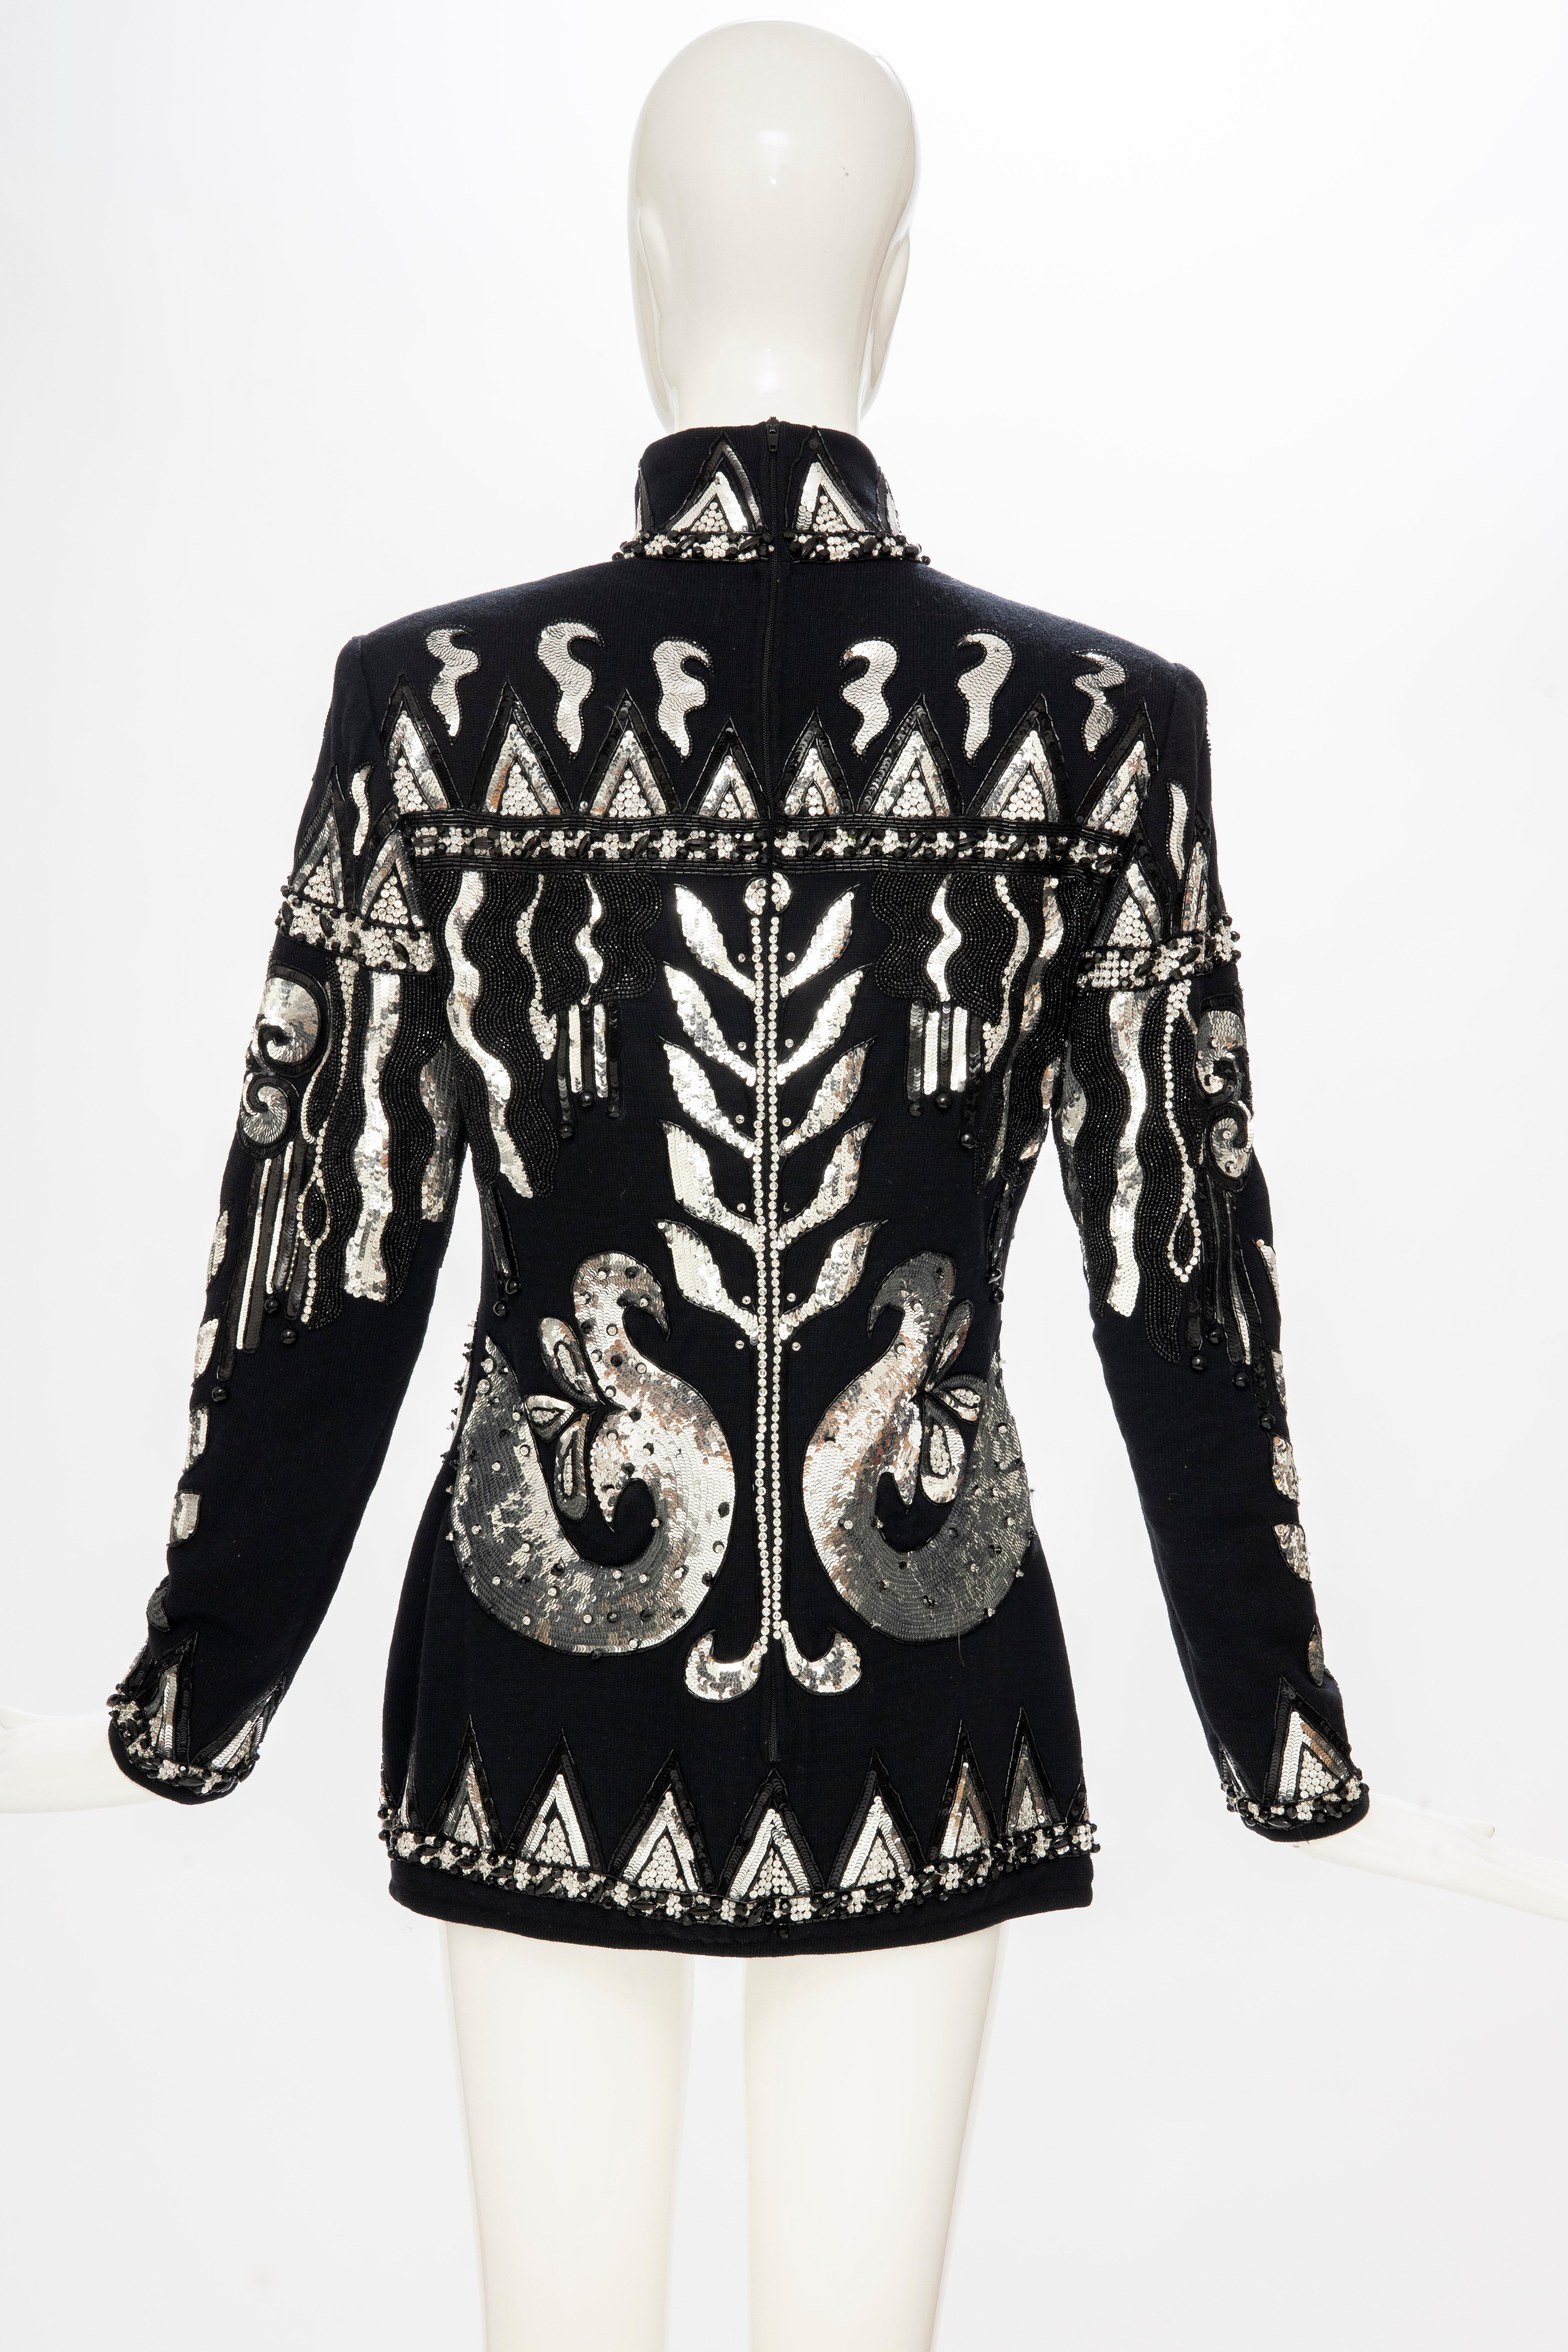 Valentino Boutique Black Wool Embroidered Silver Sequins Sweater, Fall 1989-90 3